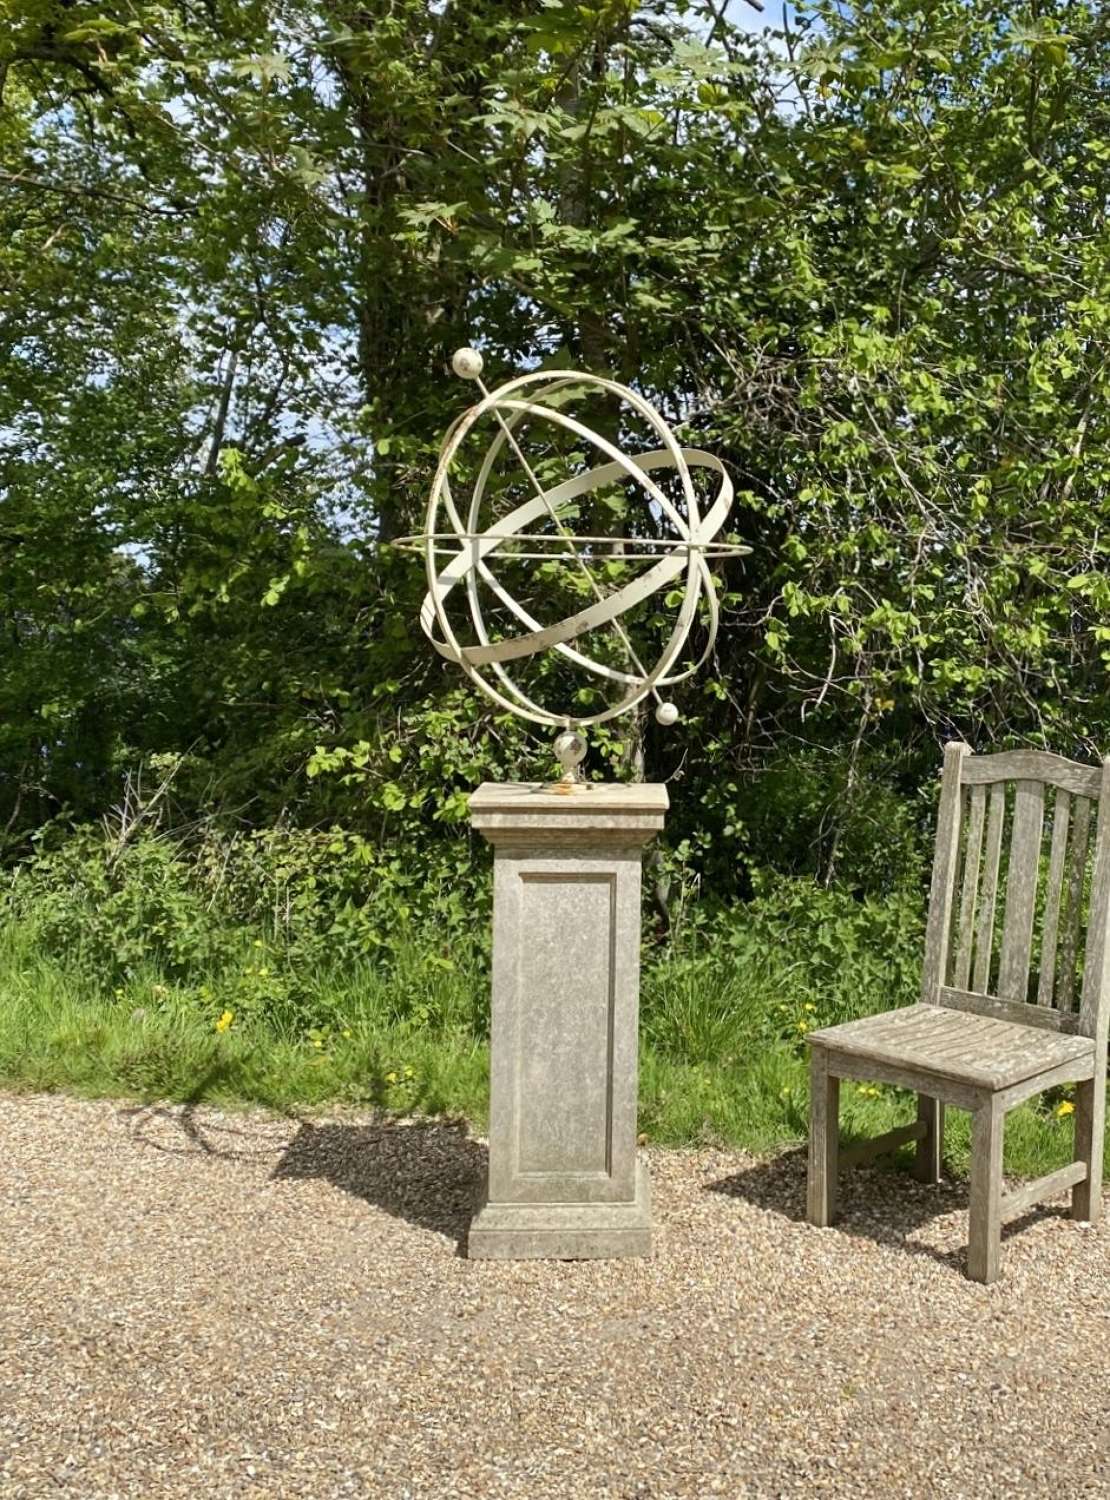 Large Decorative Armillary and Weathered Pedestal